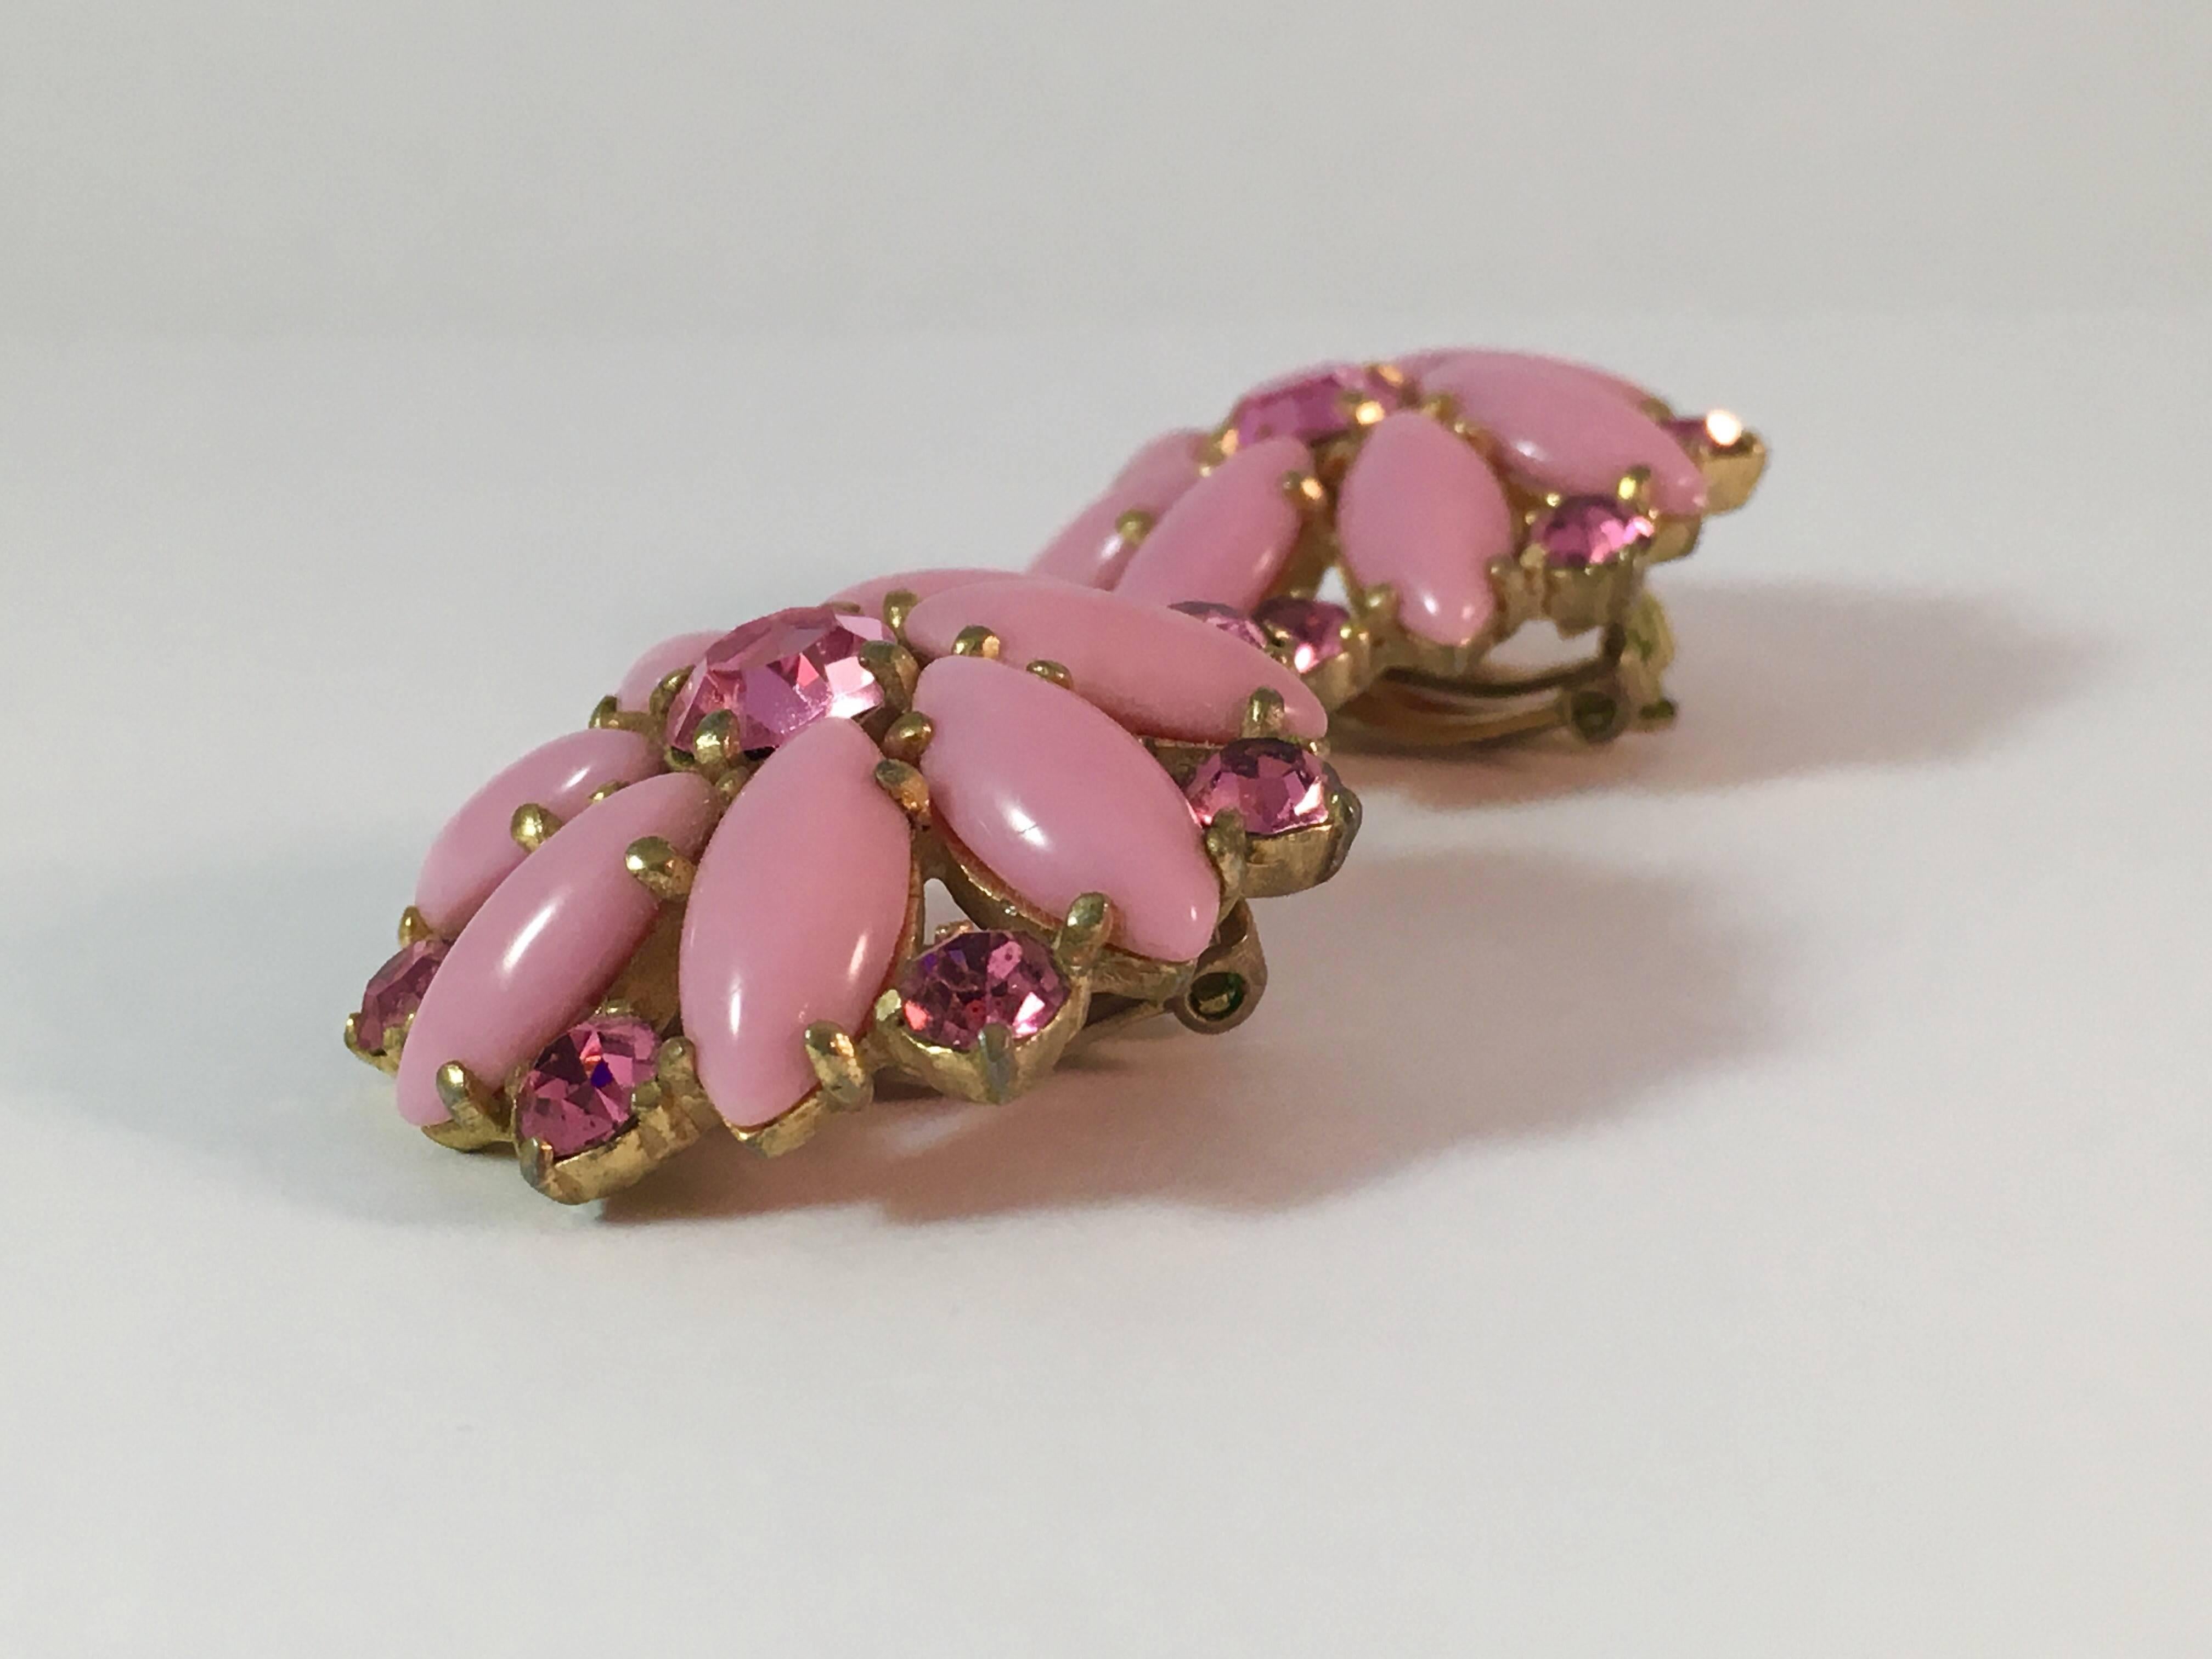 This is a pair of classic Elsa Schiaparelli earrings in her signature color - pink. They are beautifully made up of opaque glass beads and clear pink rhinestones. There is some wear to the goldtone finish on the backs of the earrings but not to the